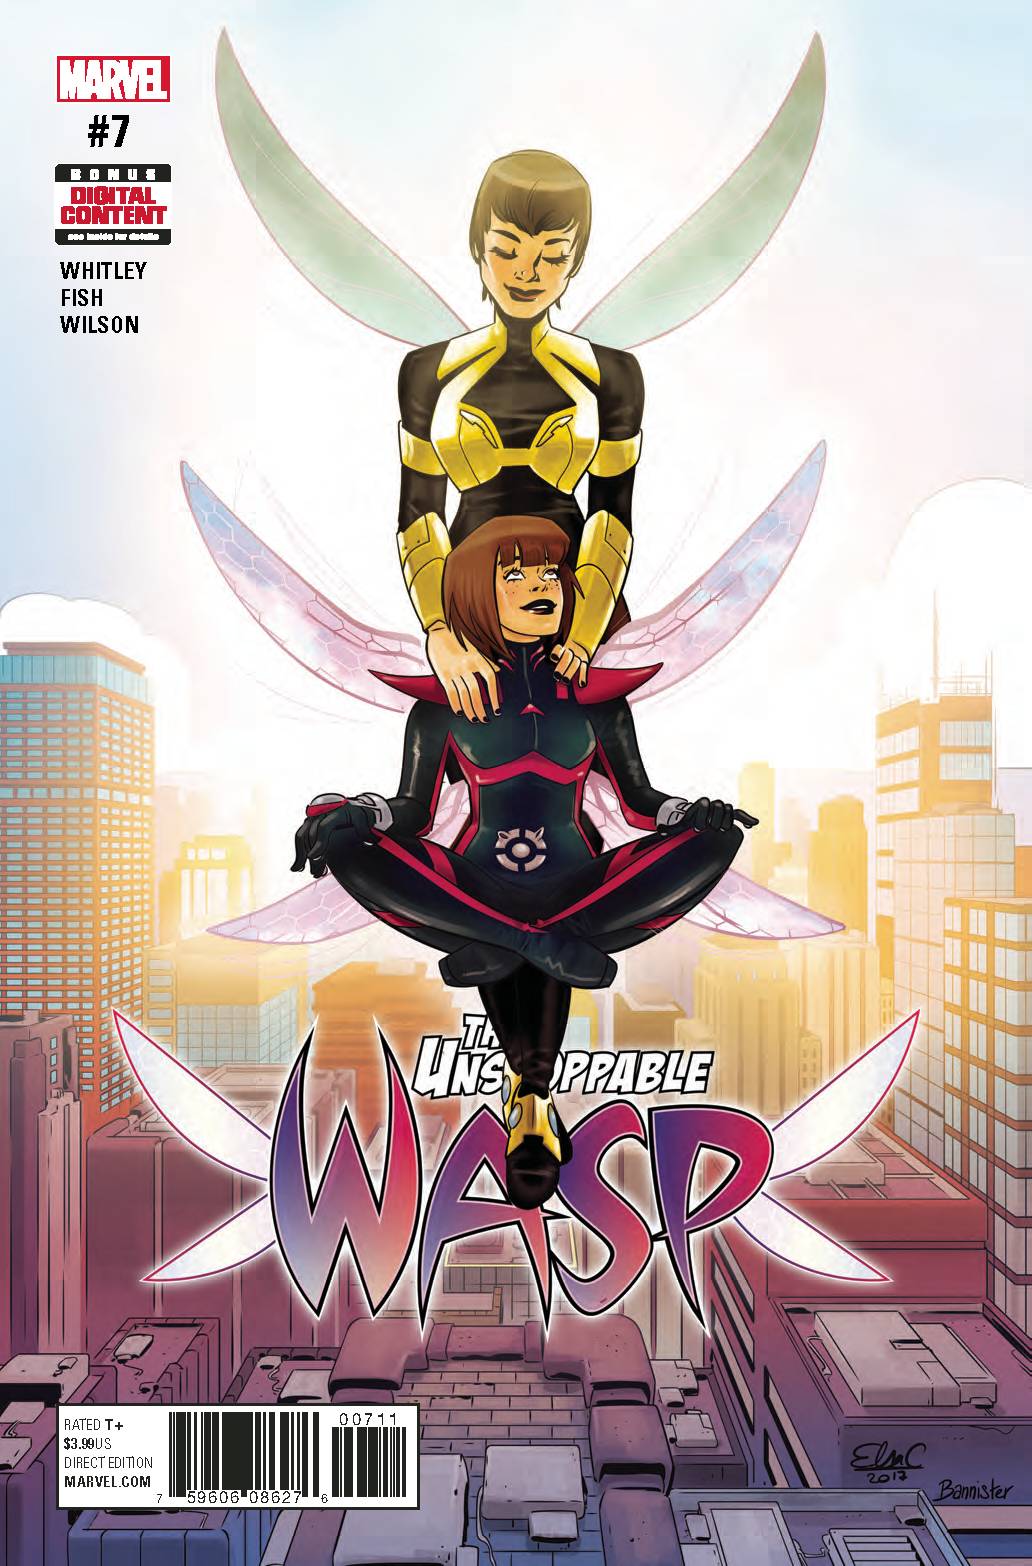 UNSTOPPABLE WASP#7